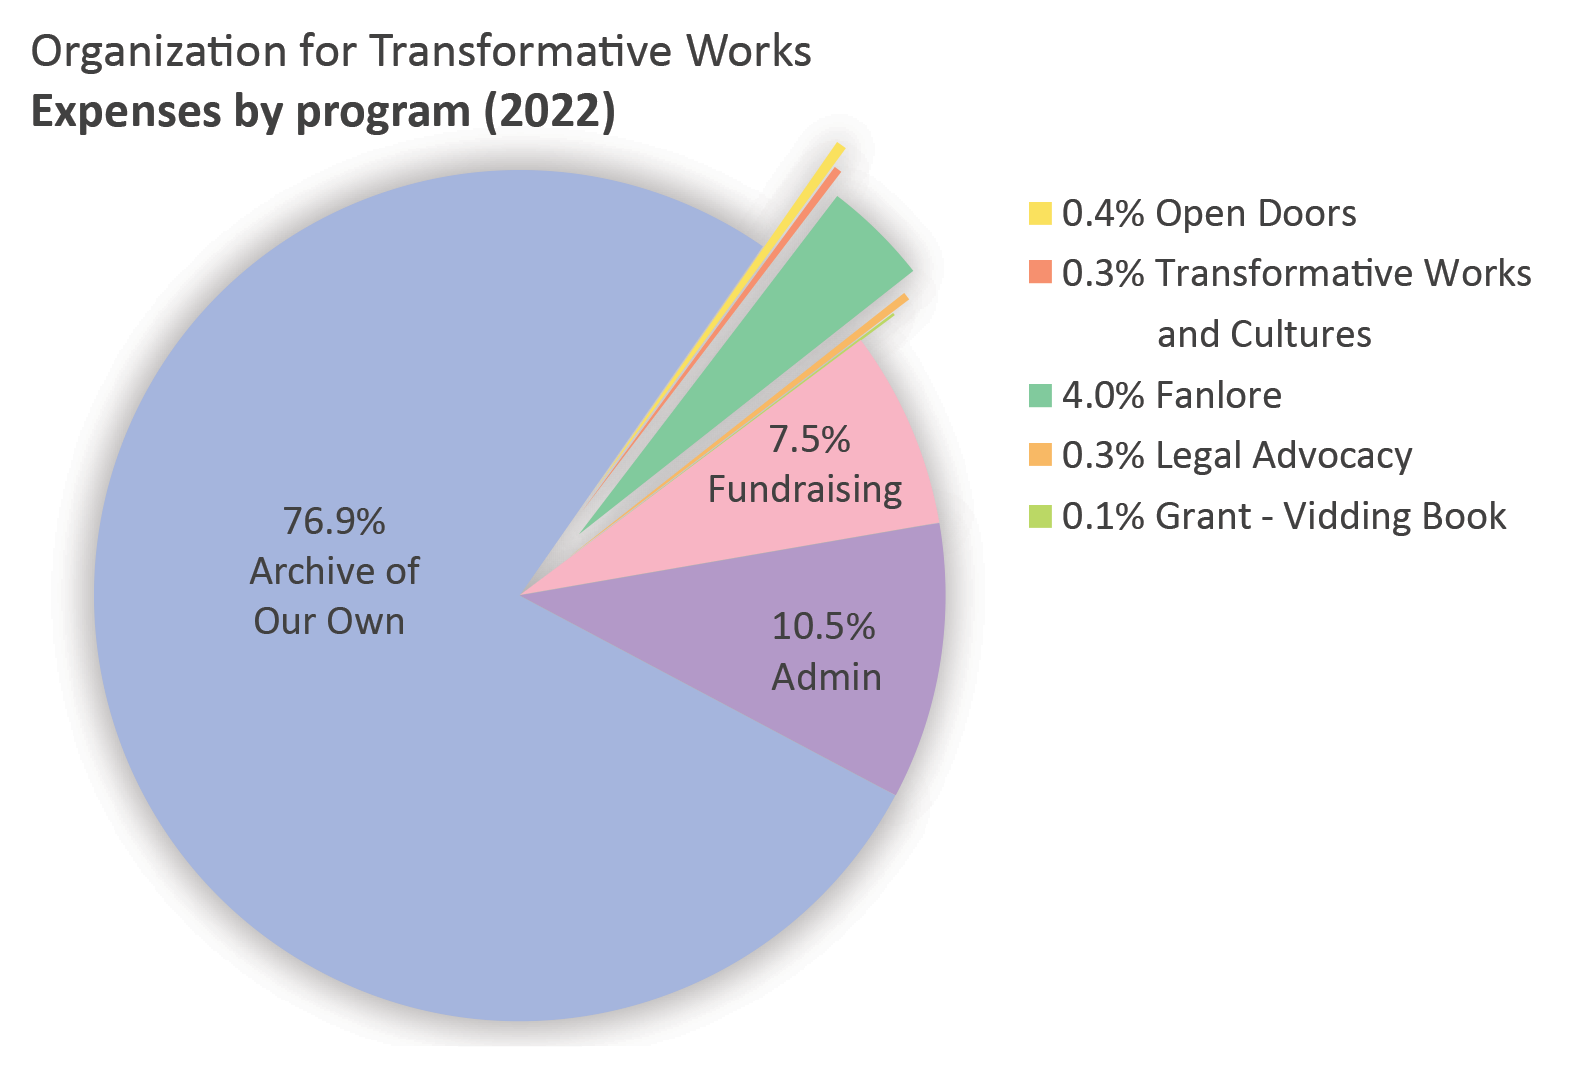 Expenses by program: Archive of Our Own: 76.9%. Open Doors: 0.4%. Transformative Works and Cultures: 0.3%. Fanlore: 4.0%. Legal Advocacy: 0.3%. Grant - Vidding Book: 0.1% Admin: 10.5%. Fundraising & Development: 7.5%.